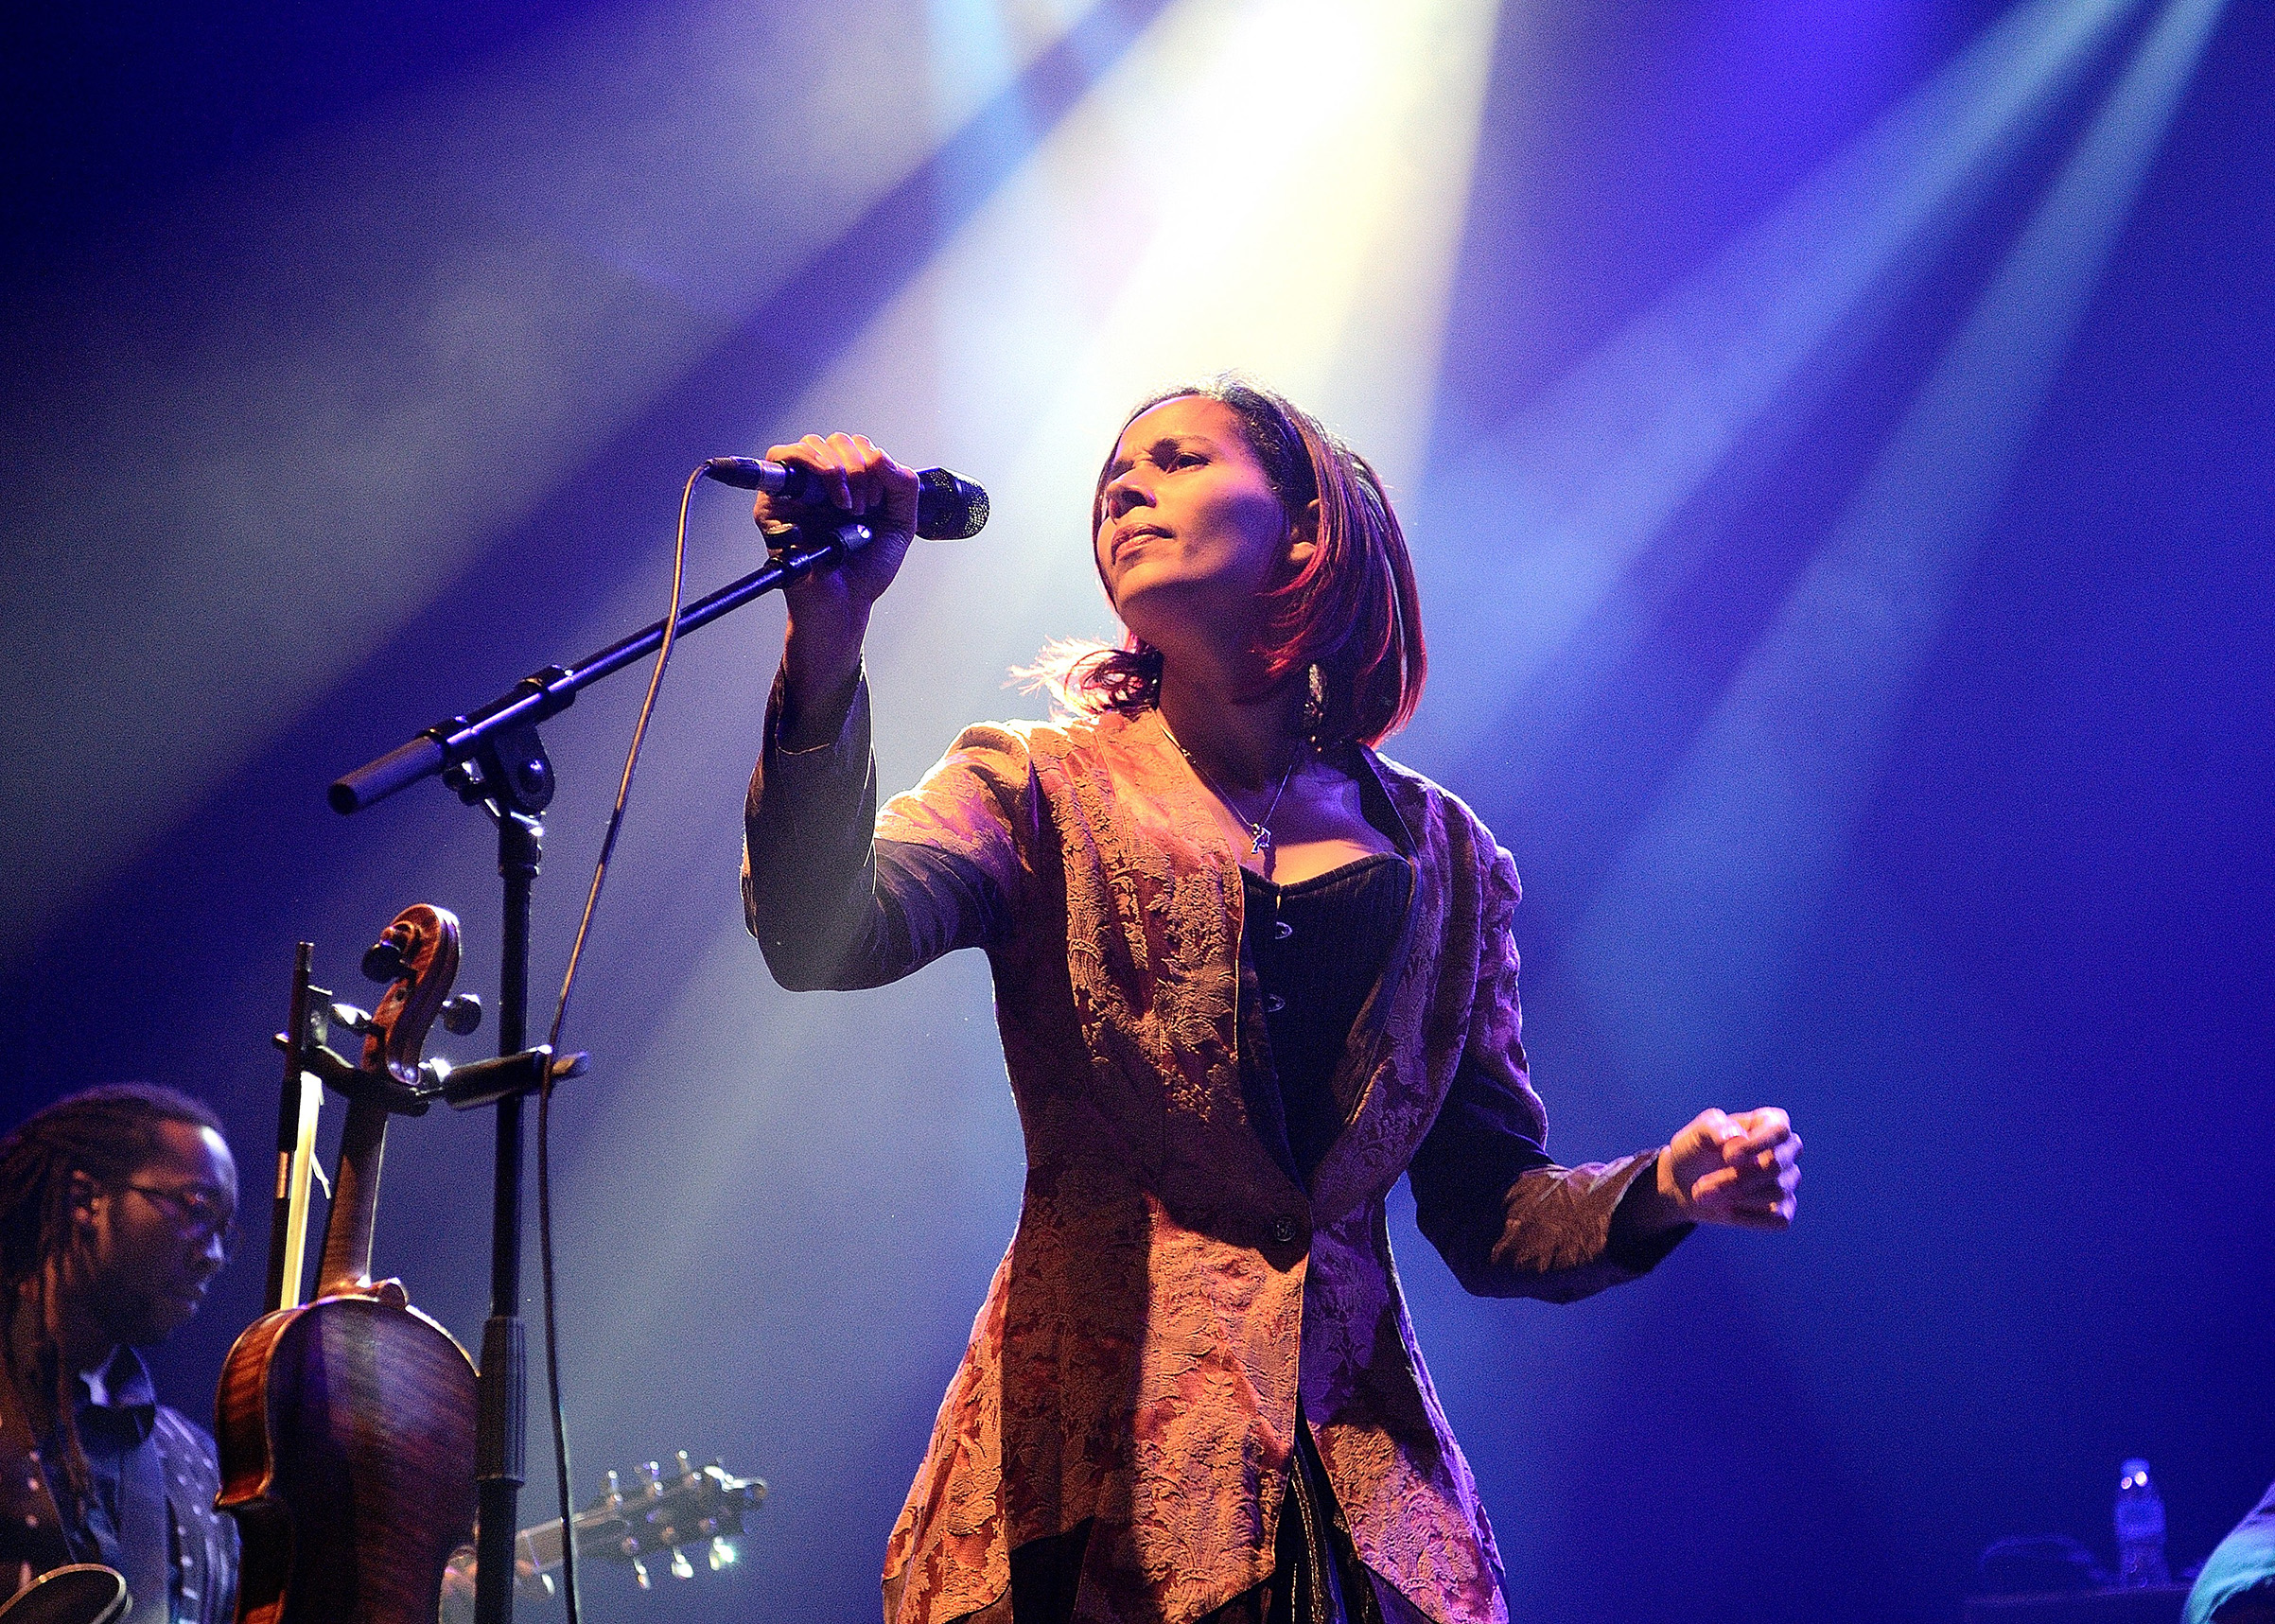 Rhiannon Giddens performs on stage at the O2 Shepherd's Bush Empire on Nov. 17, 2017. (Gus Stewart—Redferns/Getty Images)